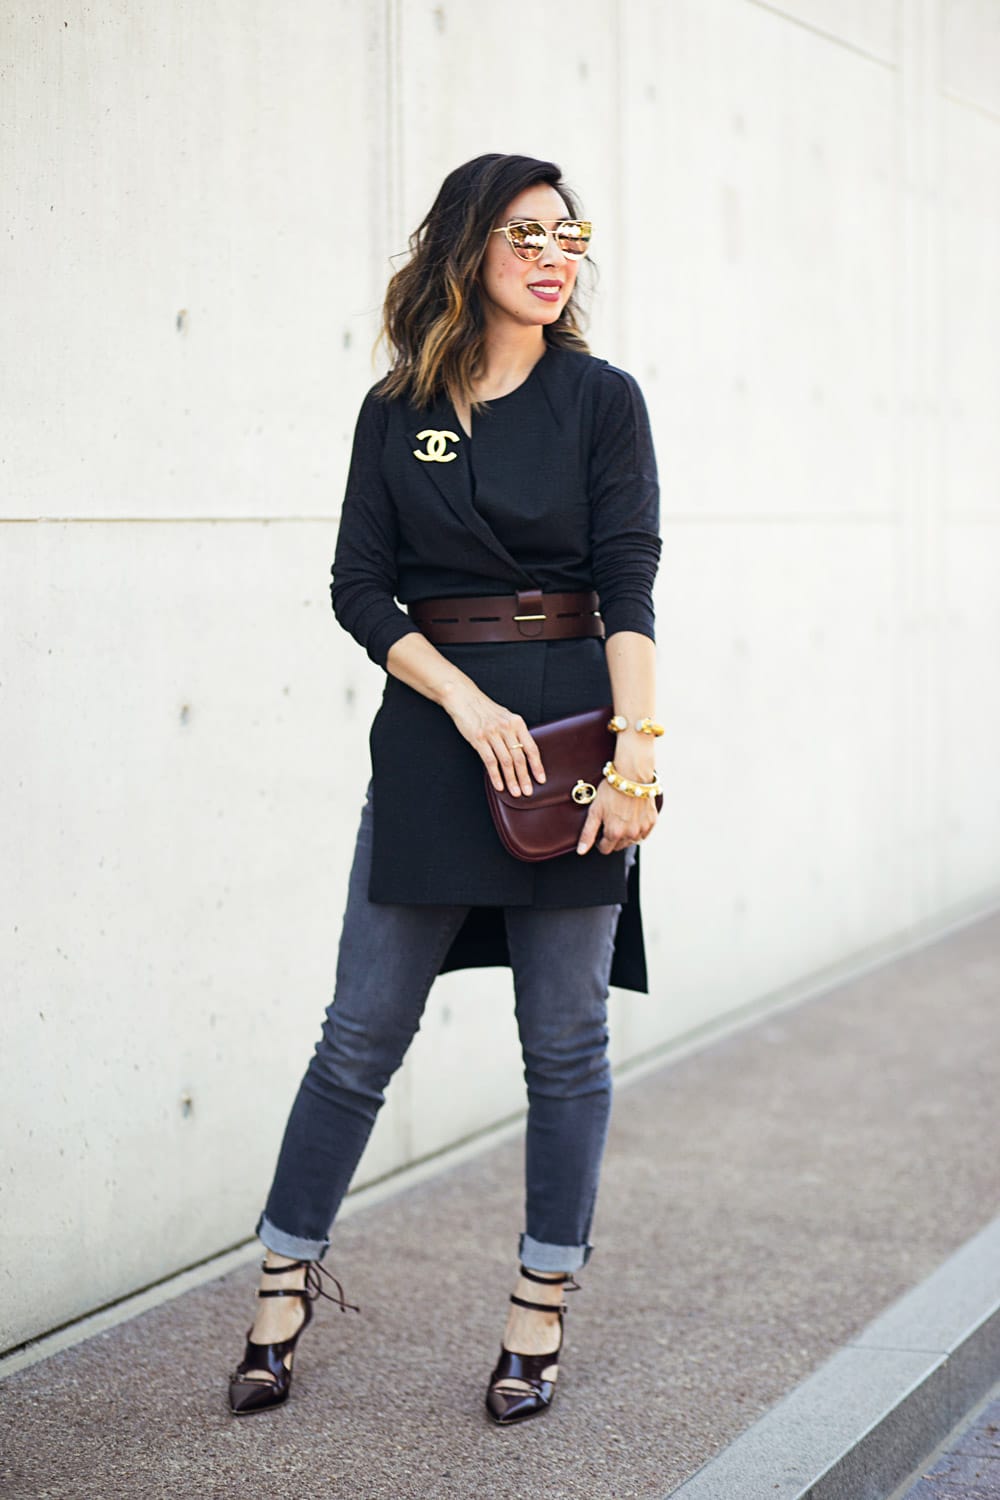 cabi drafting vest with chanel brooch and slim boyfriend jeans for a girls night out outfit